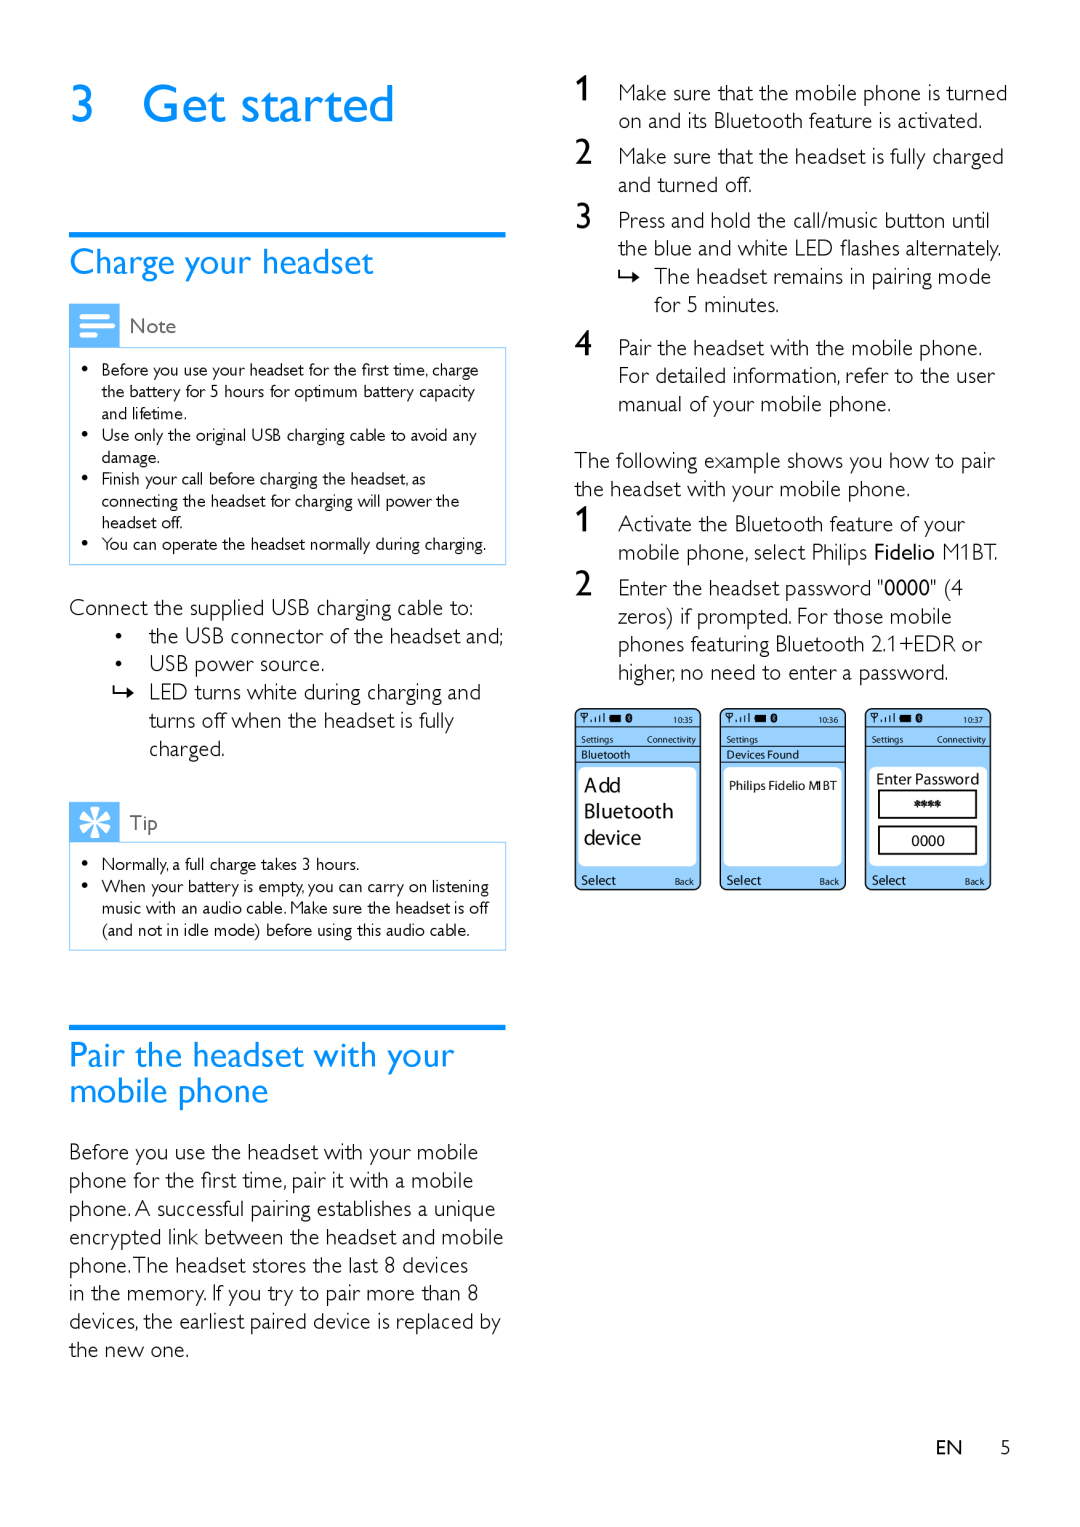 Philips M1BT user manual Get started, Charge your headset, Pair the headset with your mobile phone 